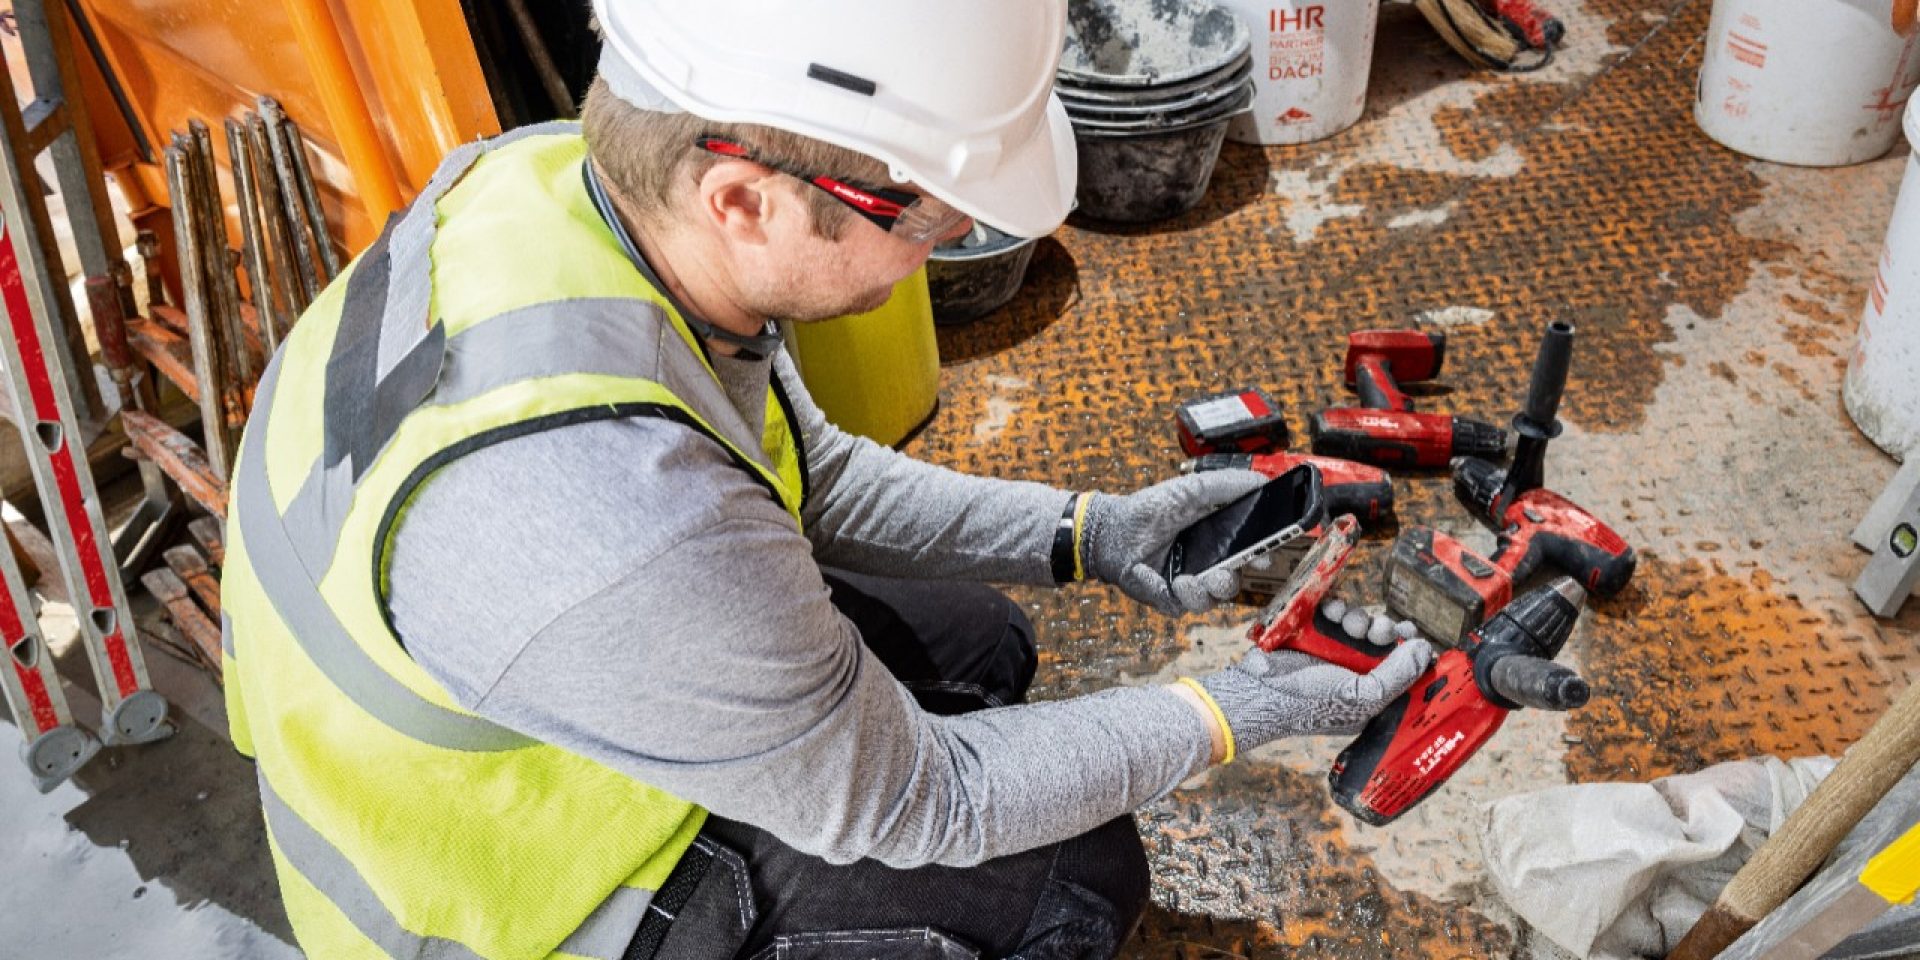 Hilti Connect App brings hassle-free tool services to your fingertips.